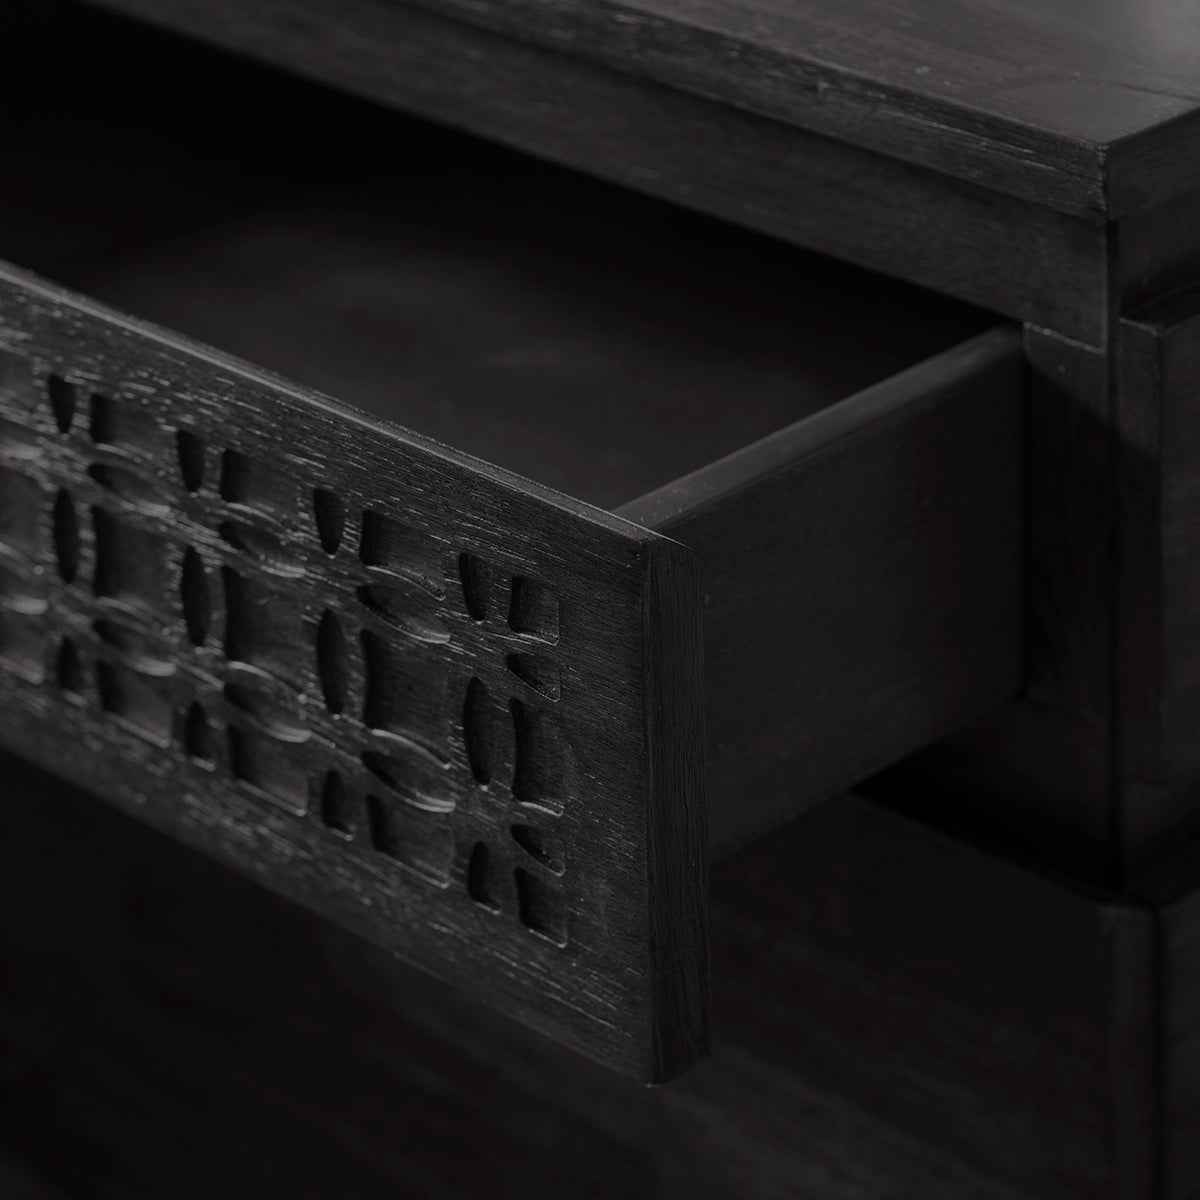 Close-up view on the partly open top drawer of the two drawer wooden black nightstand. The blind fretwork on the top drawer can also be seen clearly. 